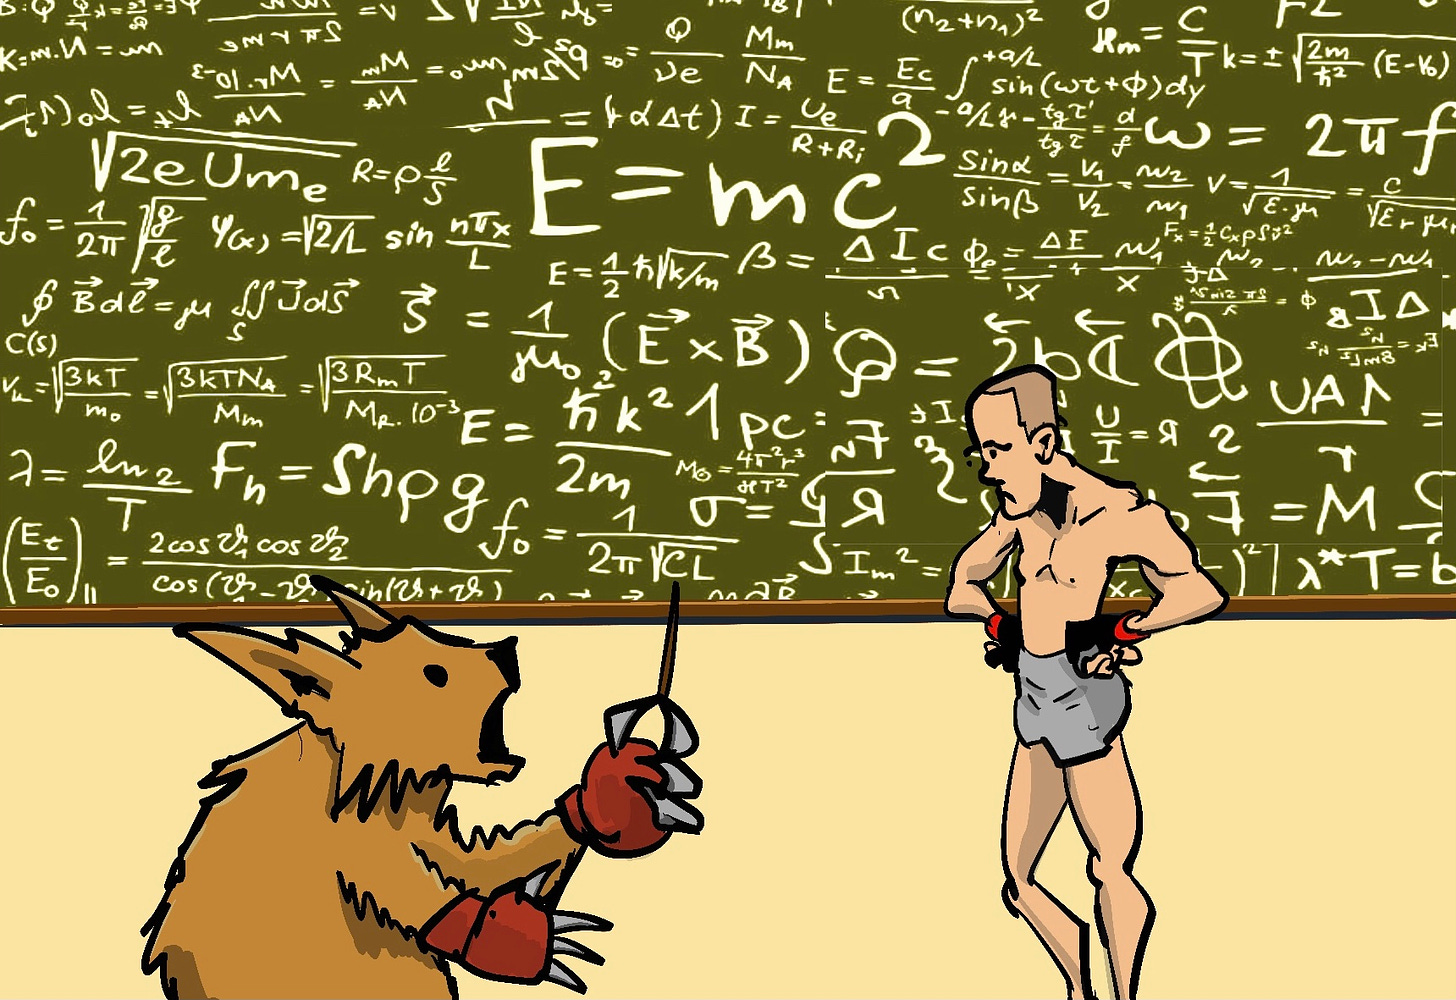 A wombat explains complex math equations to an MMA fighter.